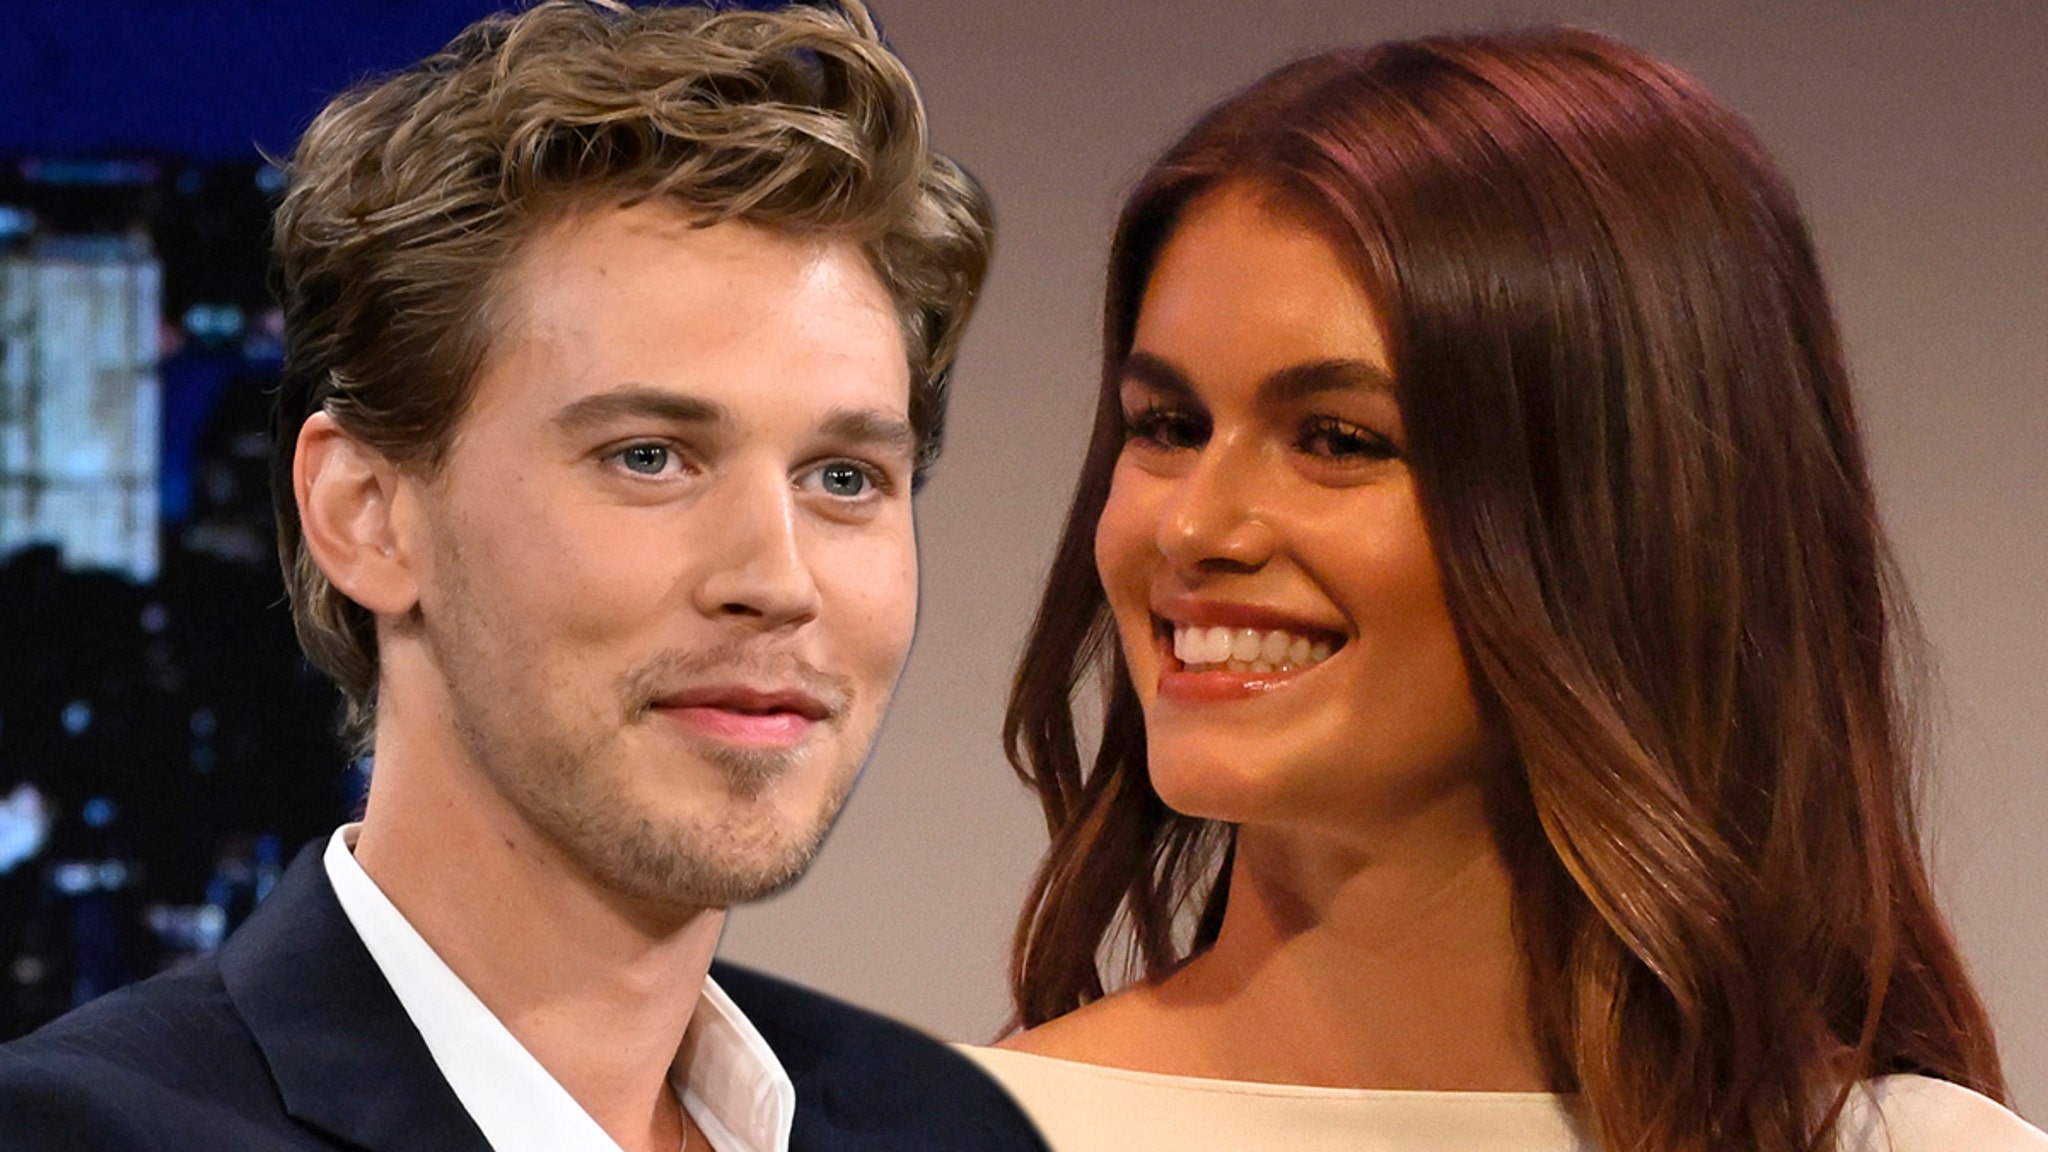 Austin Butler and Kaia Gerber Are Not Engaged Despite Buzz Online